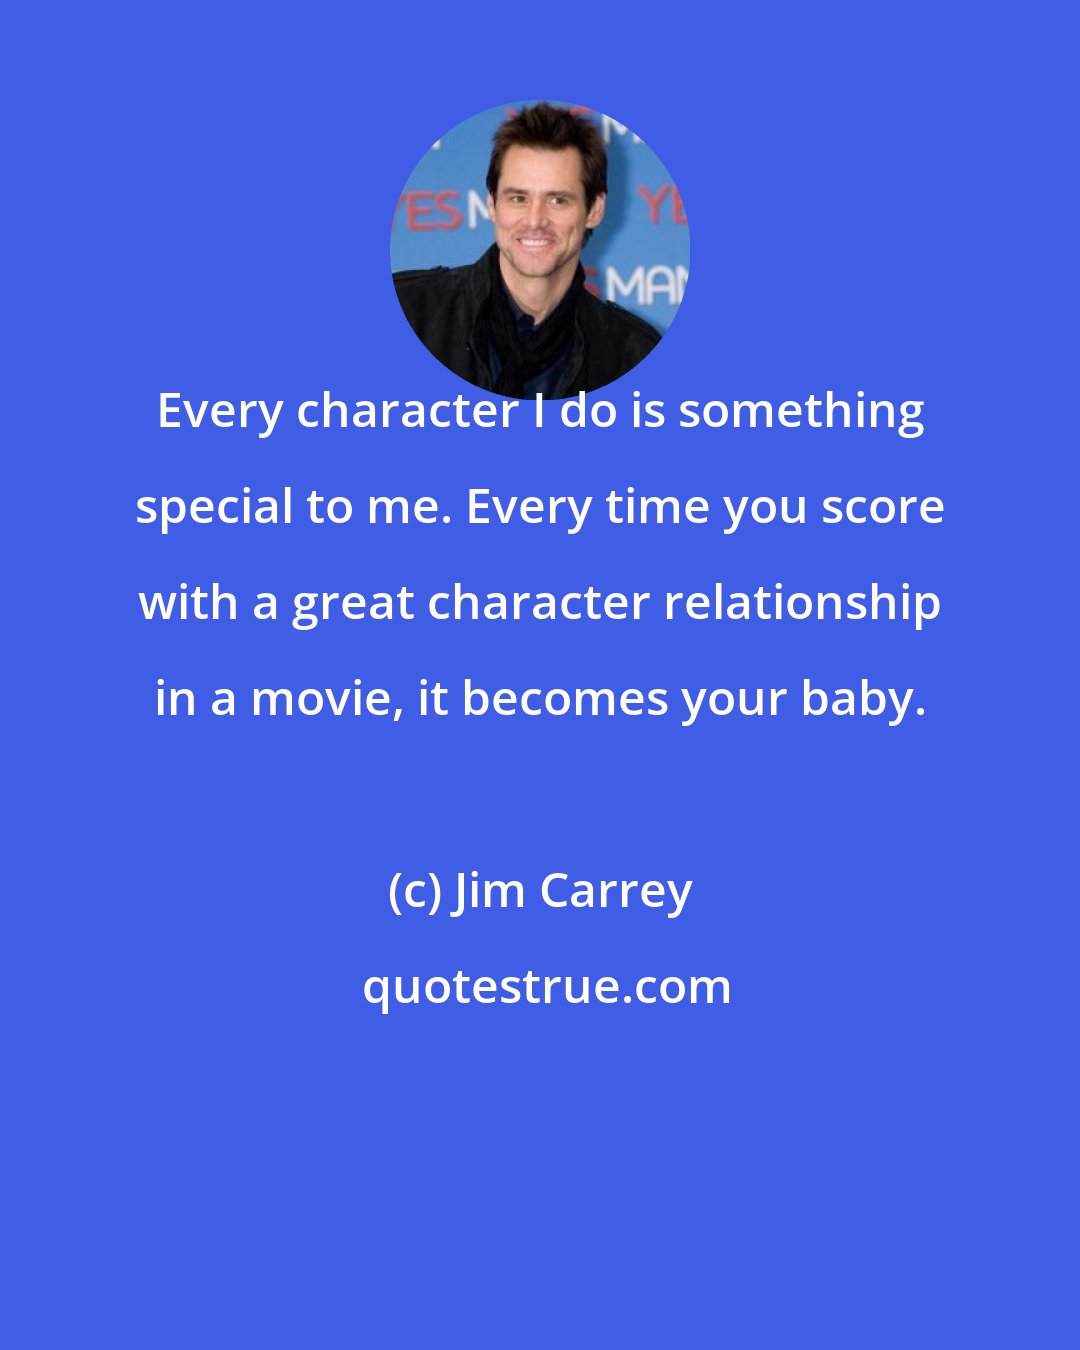 Jim Carrey: Every character I do is something special to me. Every time you score with a great character relationship in a movie, it becomes your baby.